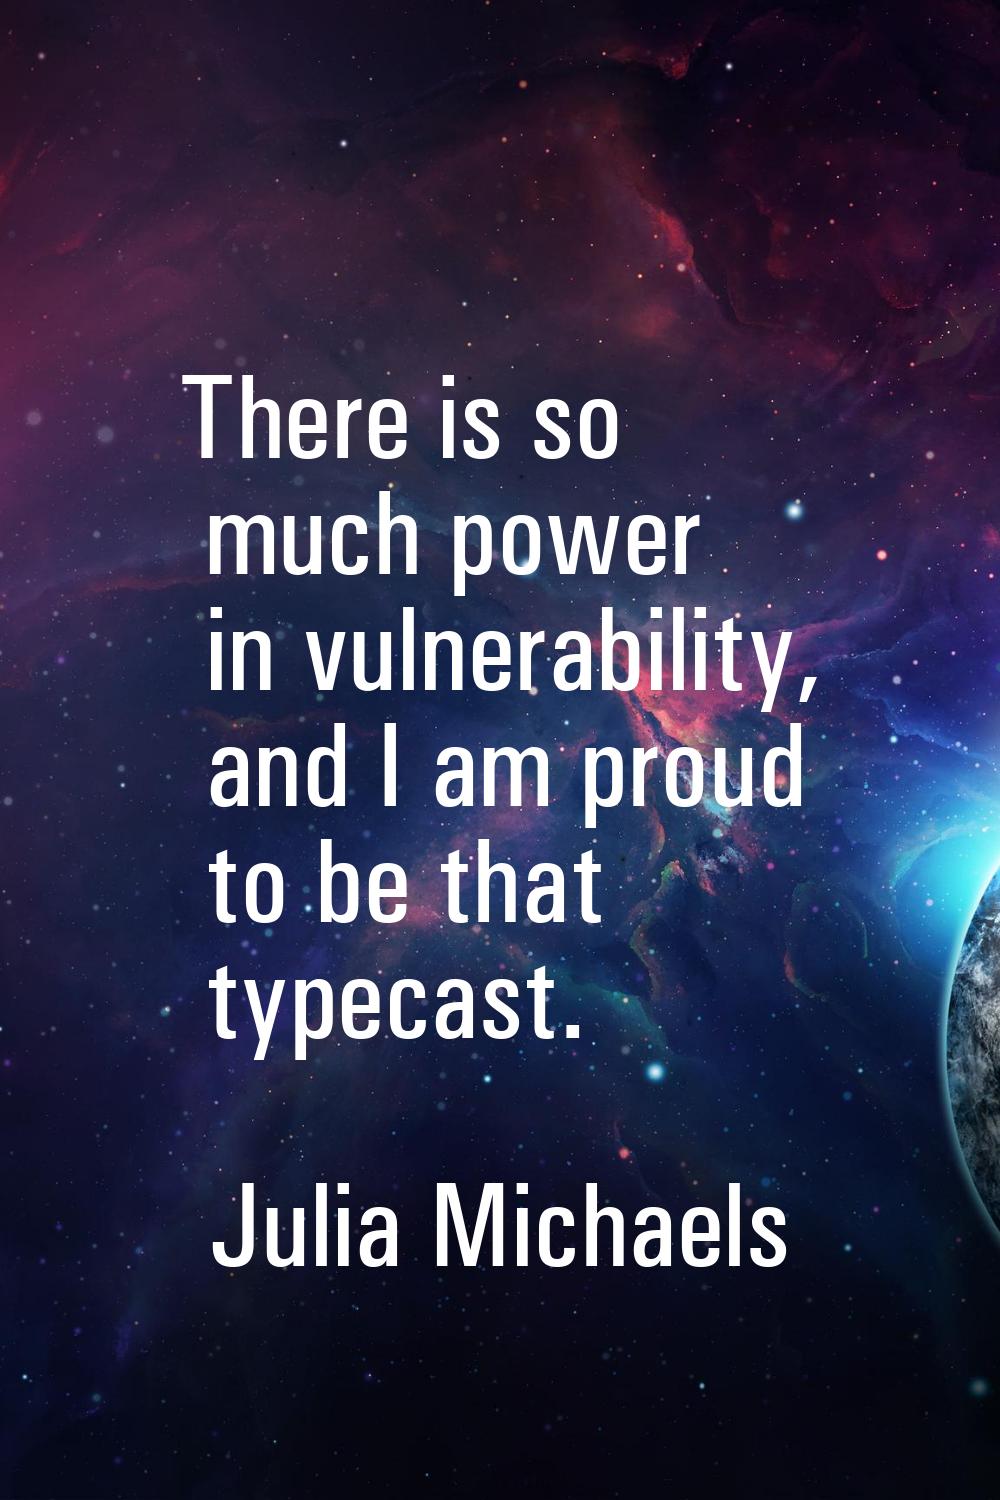 There is so much power in vulnerability, and I am proud to be that typecast.